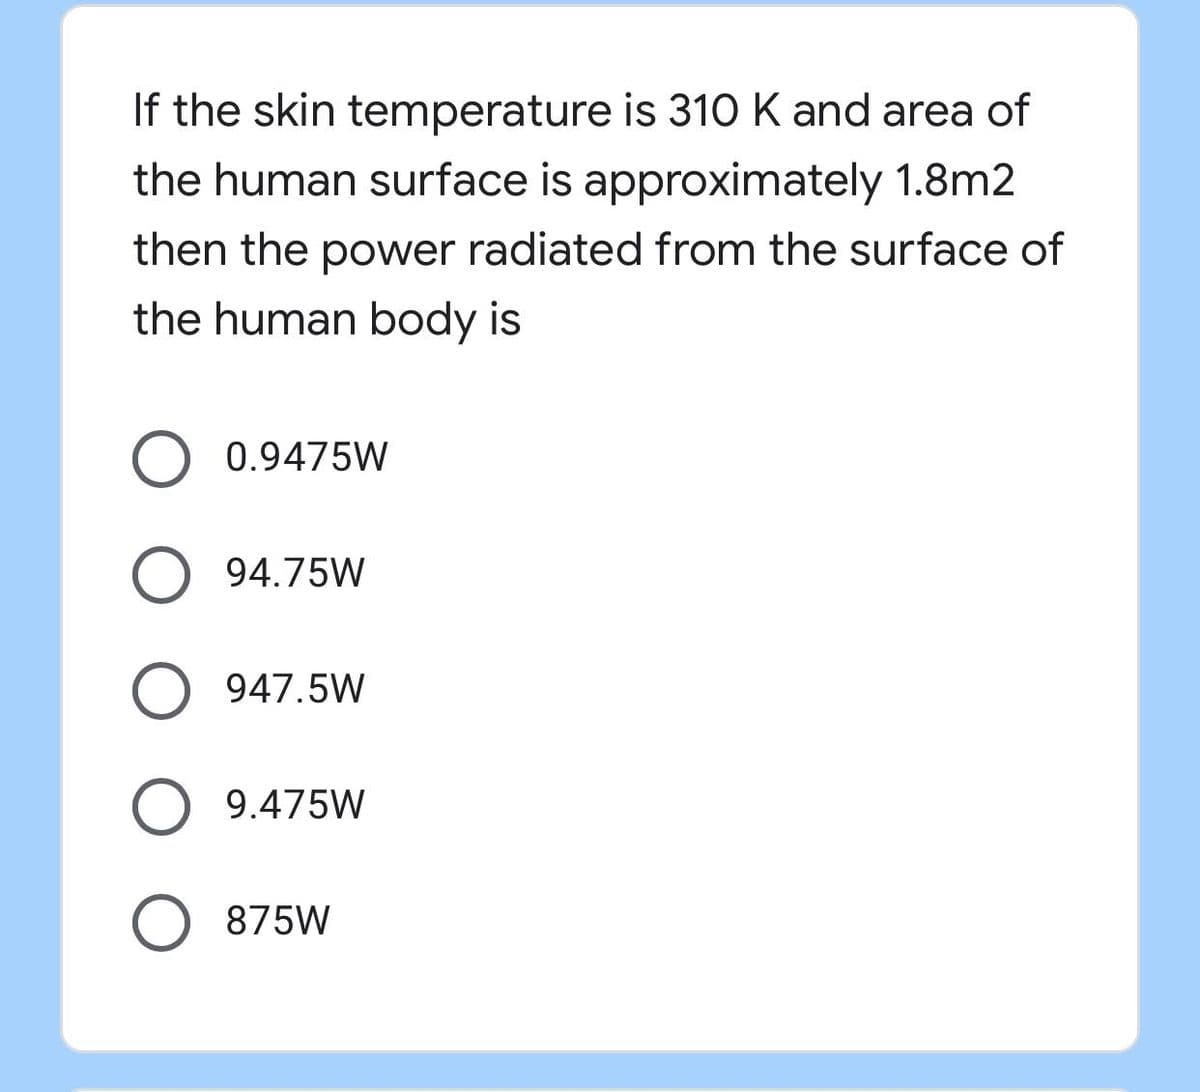 If the skin temperature is 310 K and area of
the human surface is approximately 1.8m2
then the power radiated from the surface of
the human body is
0.9475W
94.75W
O 947.5W
9.475W
O 875W